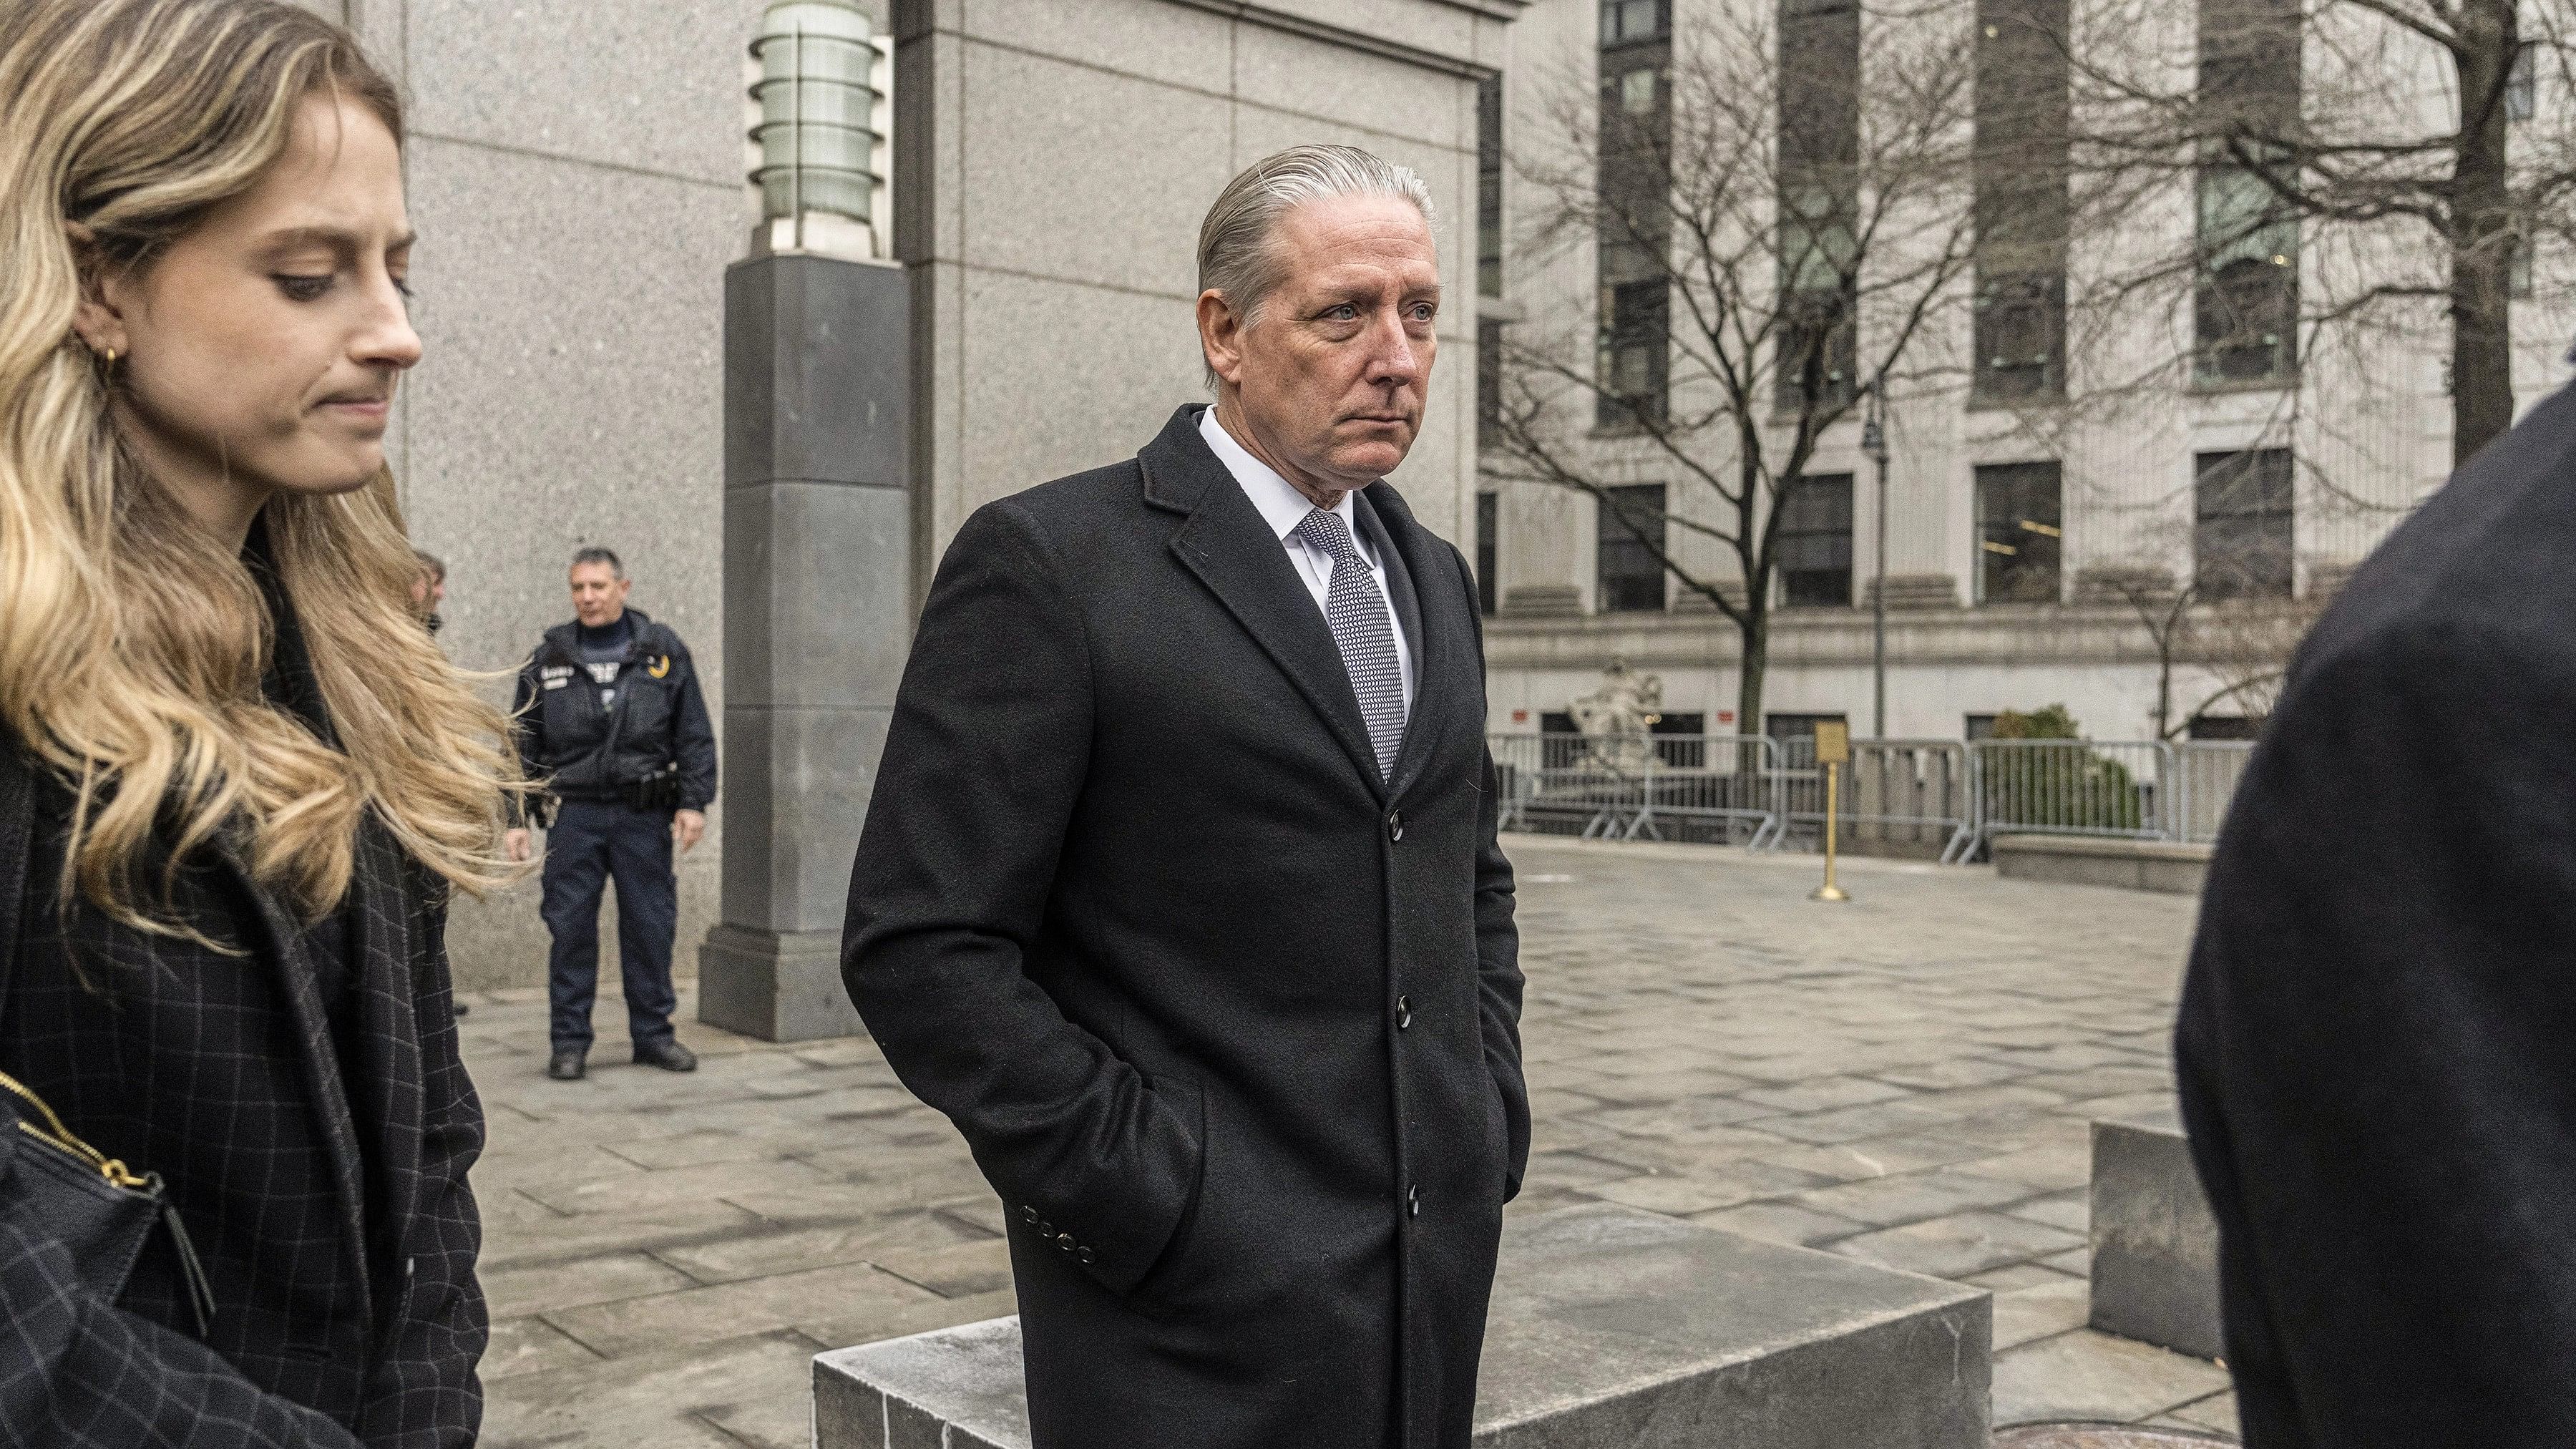 <div class="paragraphs"><p>Charles McGonigal illegally cultivated ties with foreign officials while serving as the FBI’s top counterintelligence official in New York City, prosecutors said.</p></div>